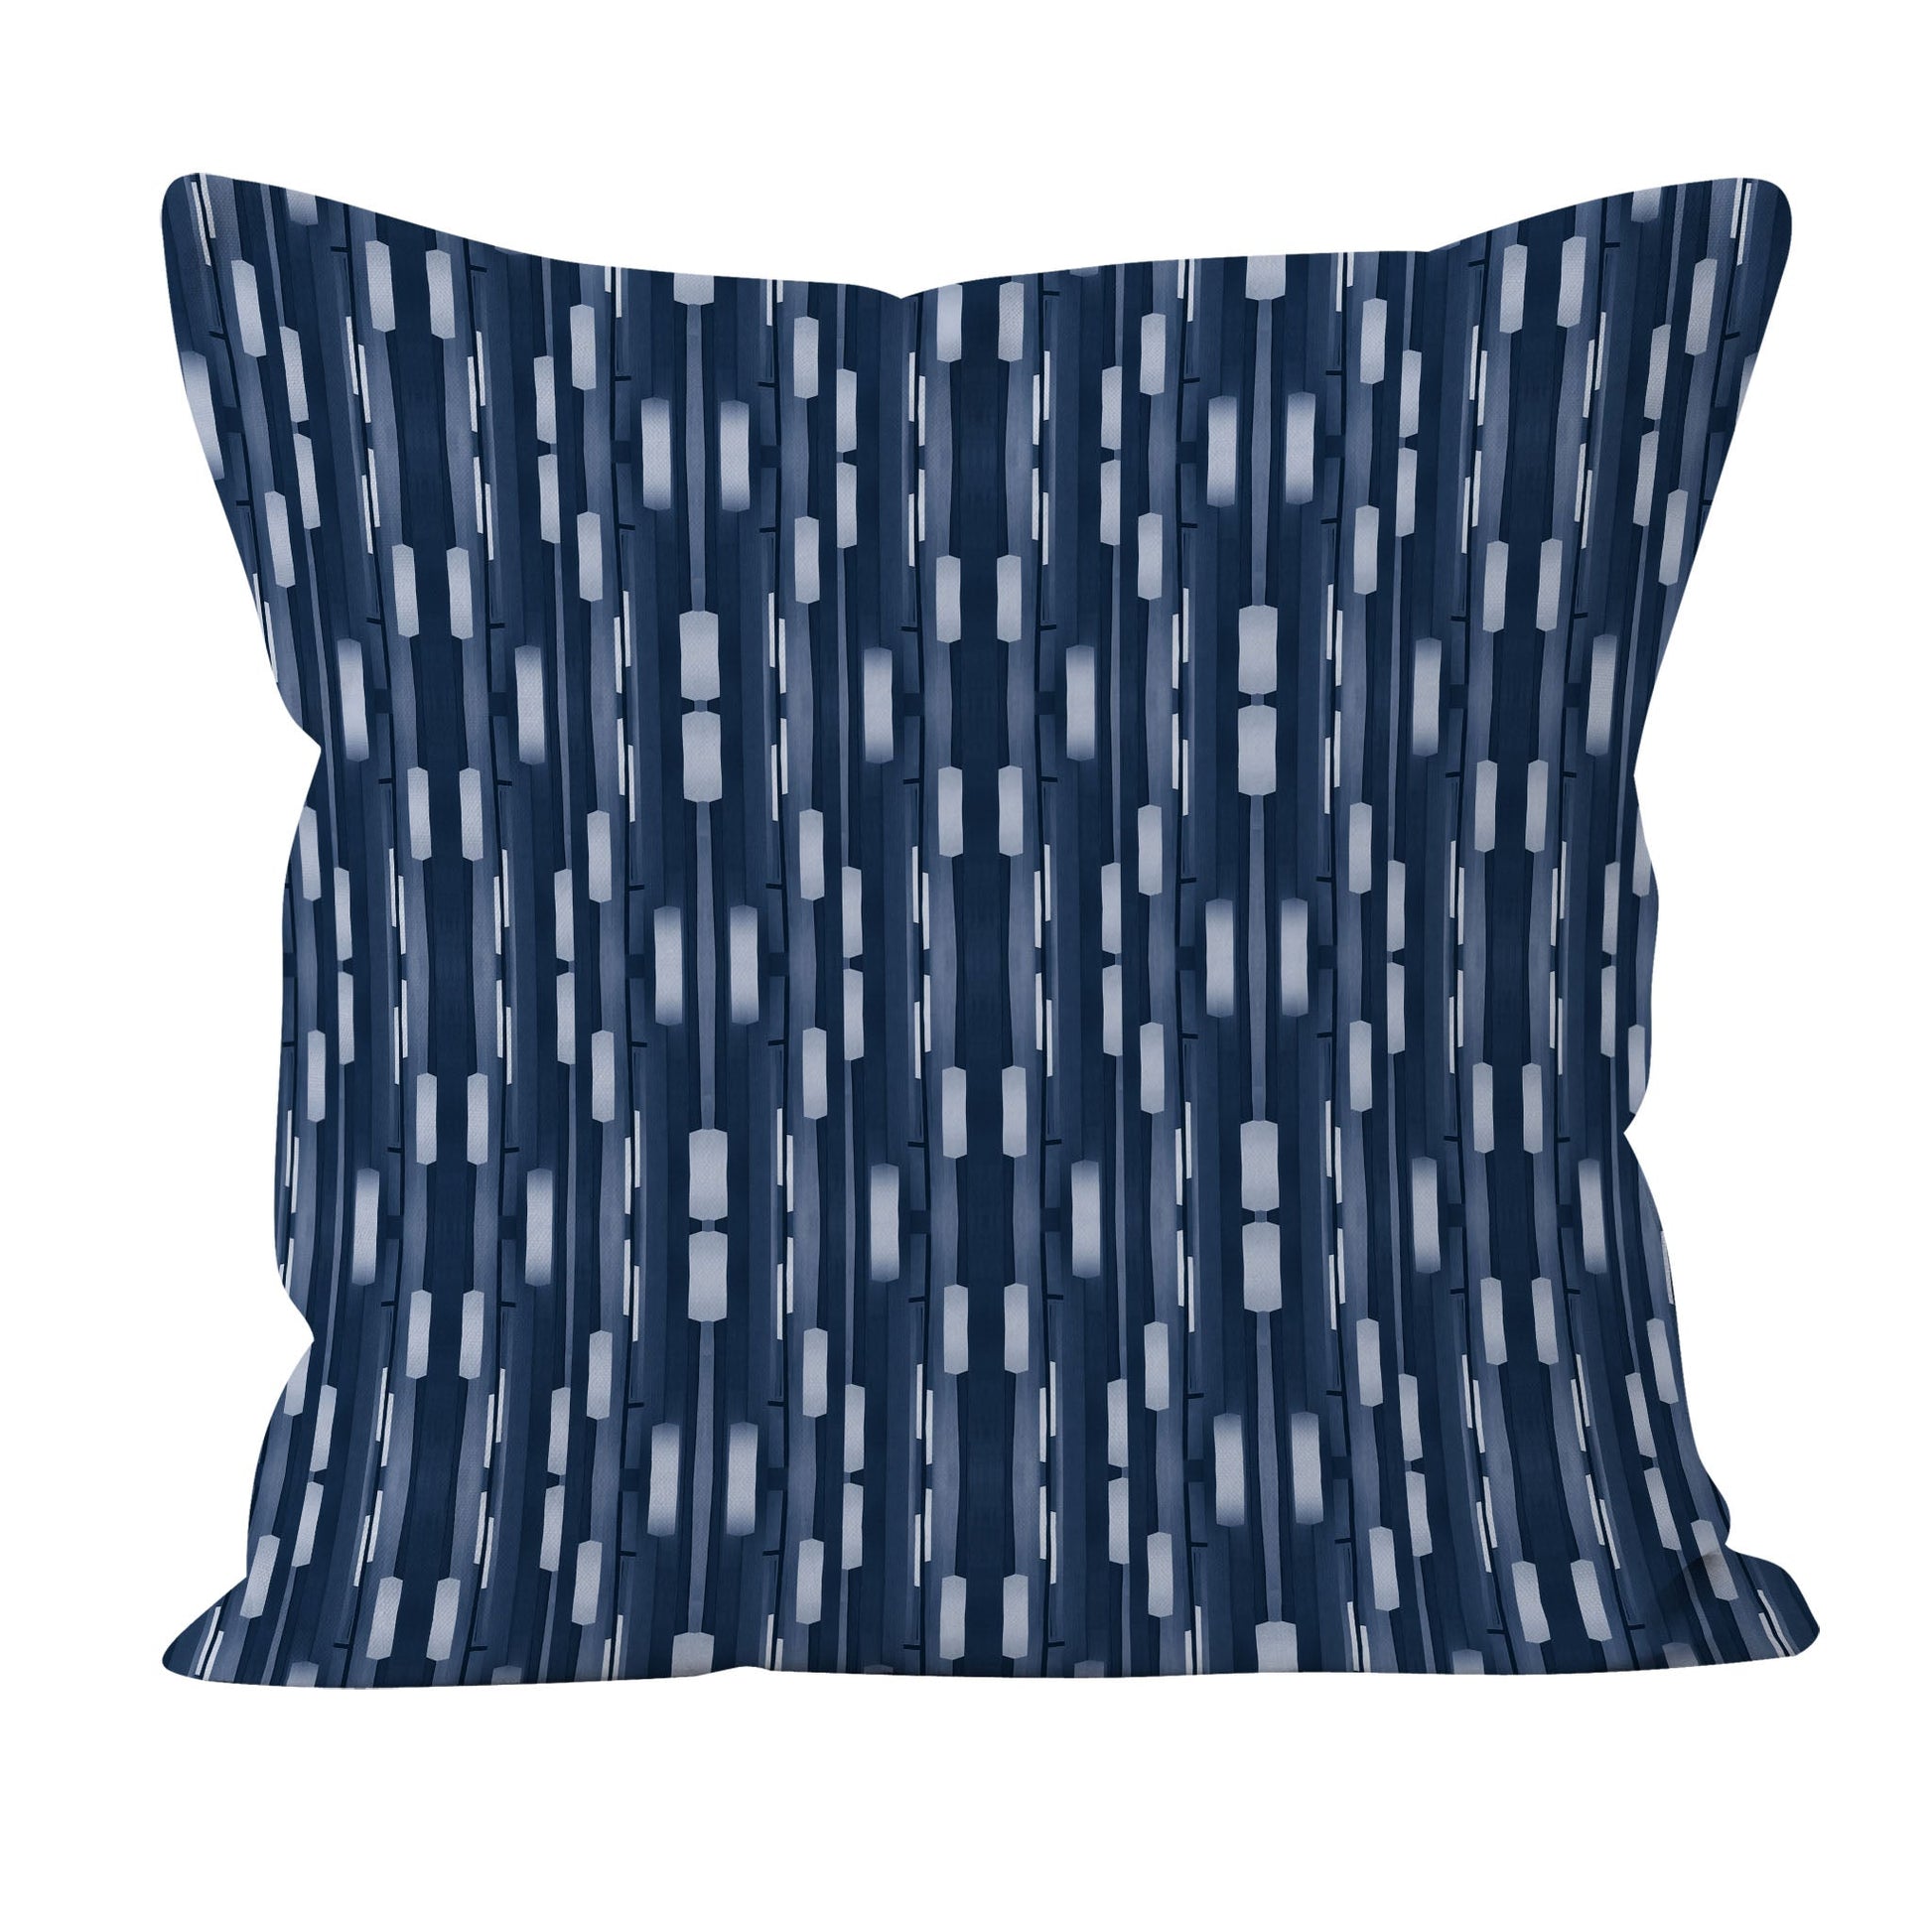 Pillow featuring collaged stripe pattern in blue and white